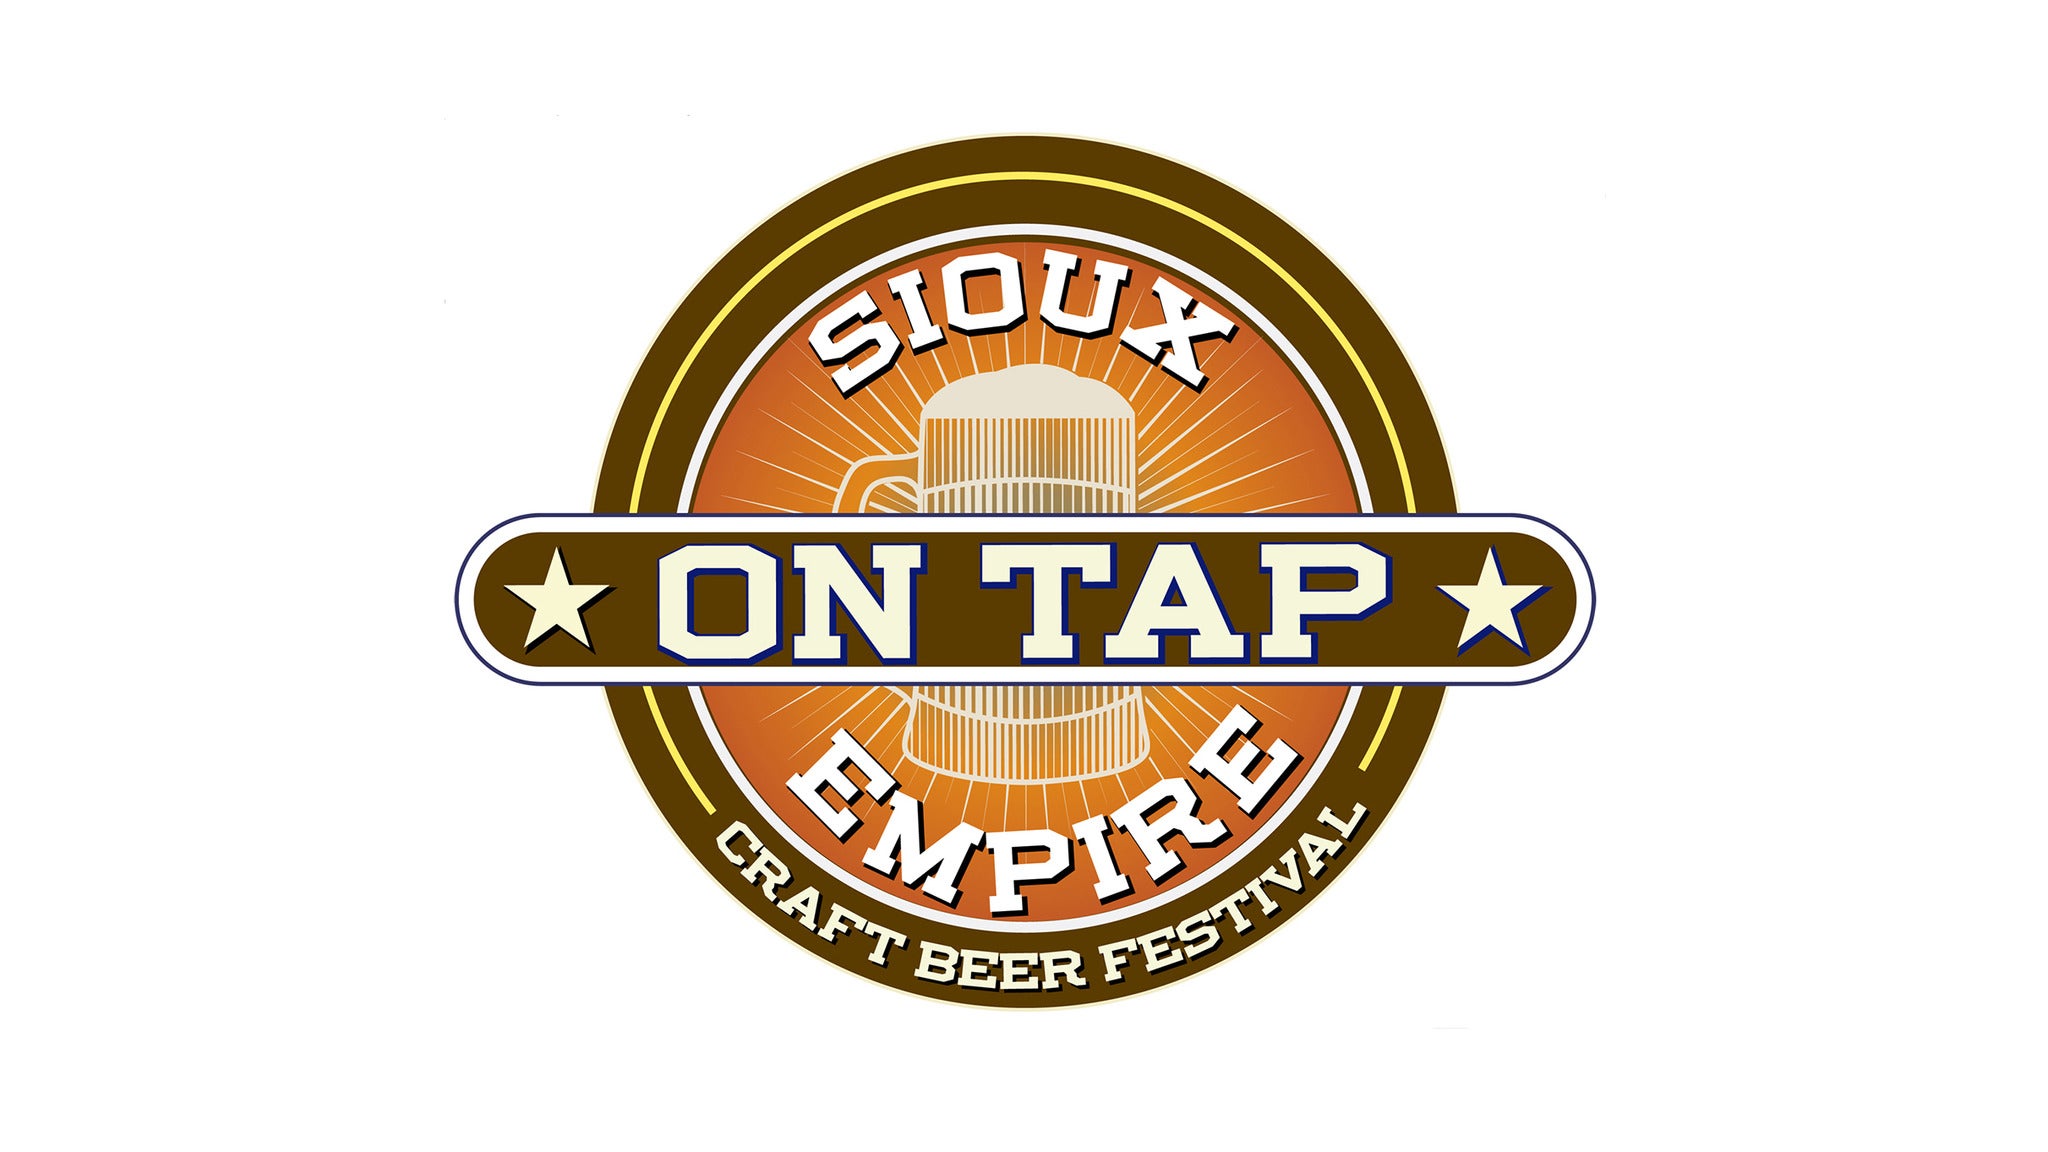 Sioux Empire On Tap in Sioux Falls promo photo for Black Friday Deal presale offer code